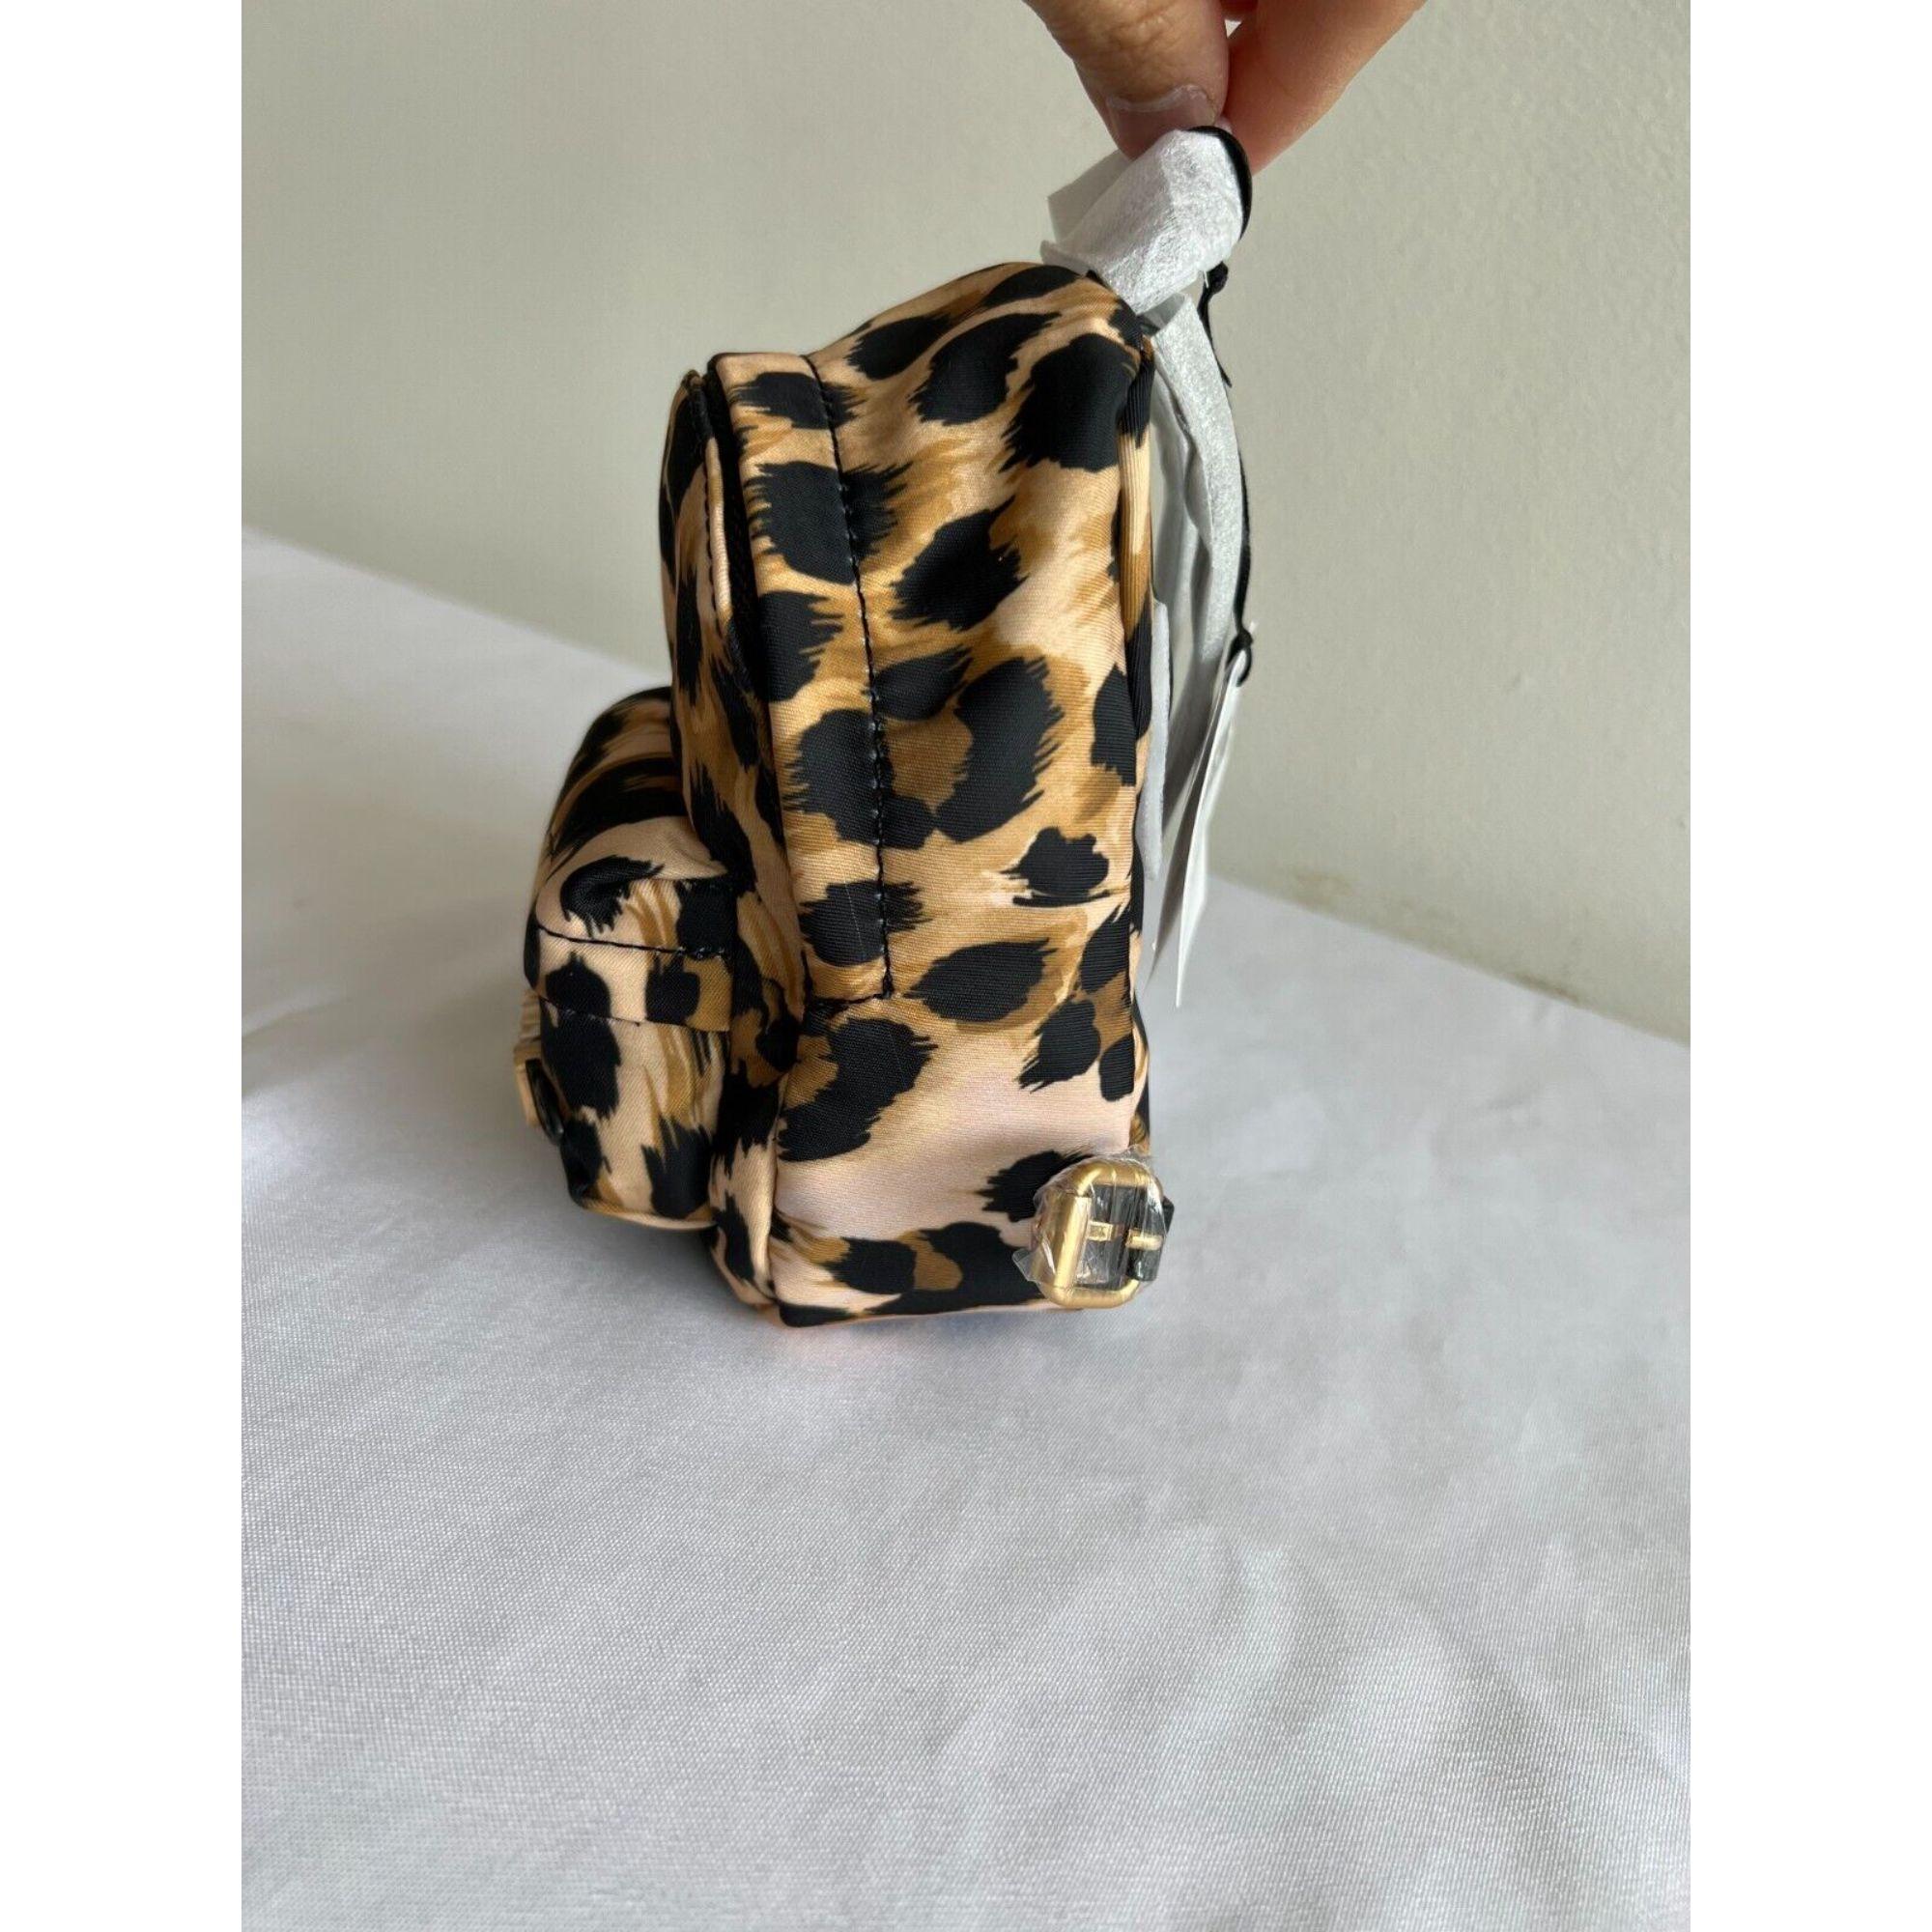 AW21 Moschino Couture Jeremy Scott Leopard Print Shoulder Bag Mini Backpack

Additional Information:
Material: Leather Details and 44% CO 41% PA 15% PU
Color: Brown, Gold, Black
Pattern: Leopard Print
Size: Mini
Style: Shoulder Bag
Dimensions: W: